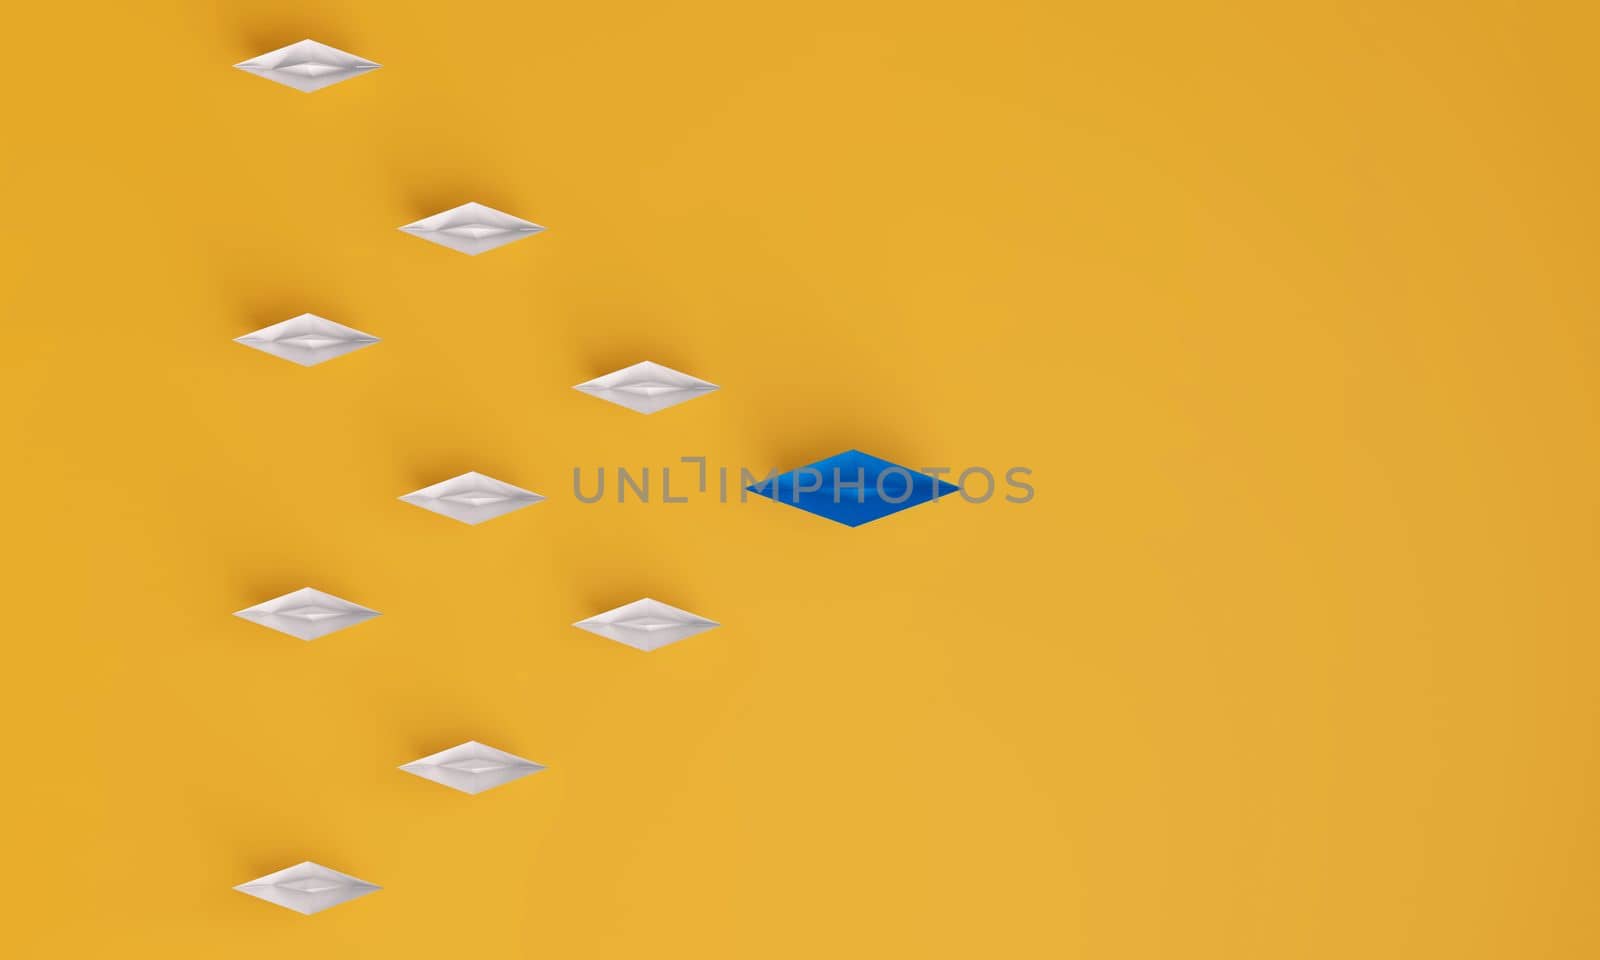 Top view of Paper boat leads blue followed by other white boat on a yellow background. Social media or internet followers concept. 3D rendering.